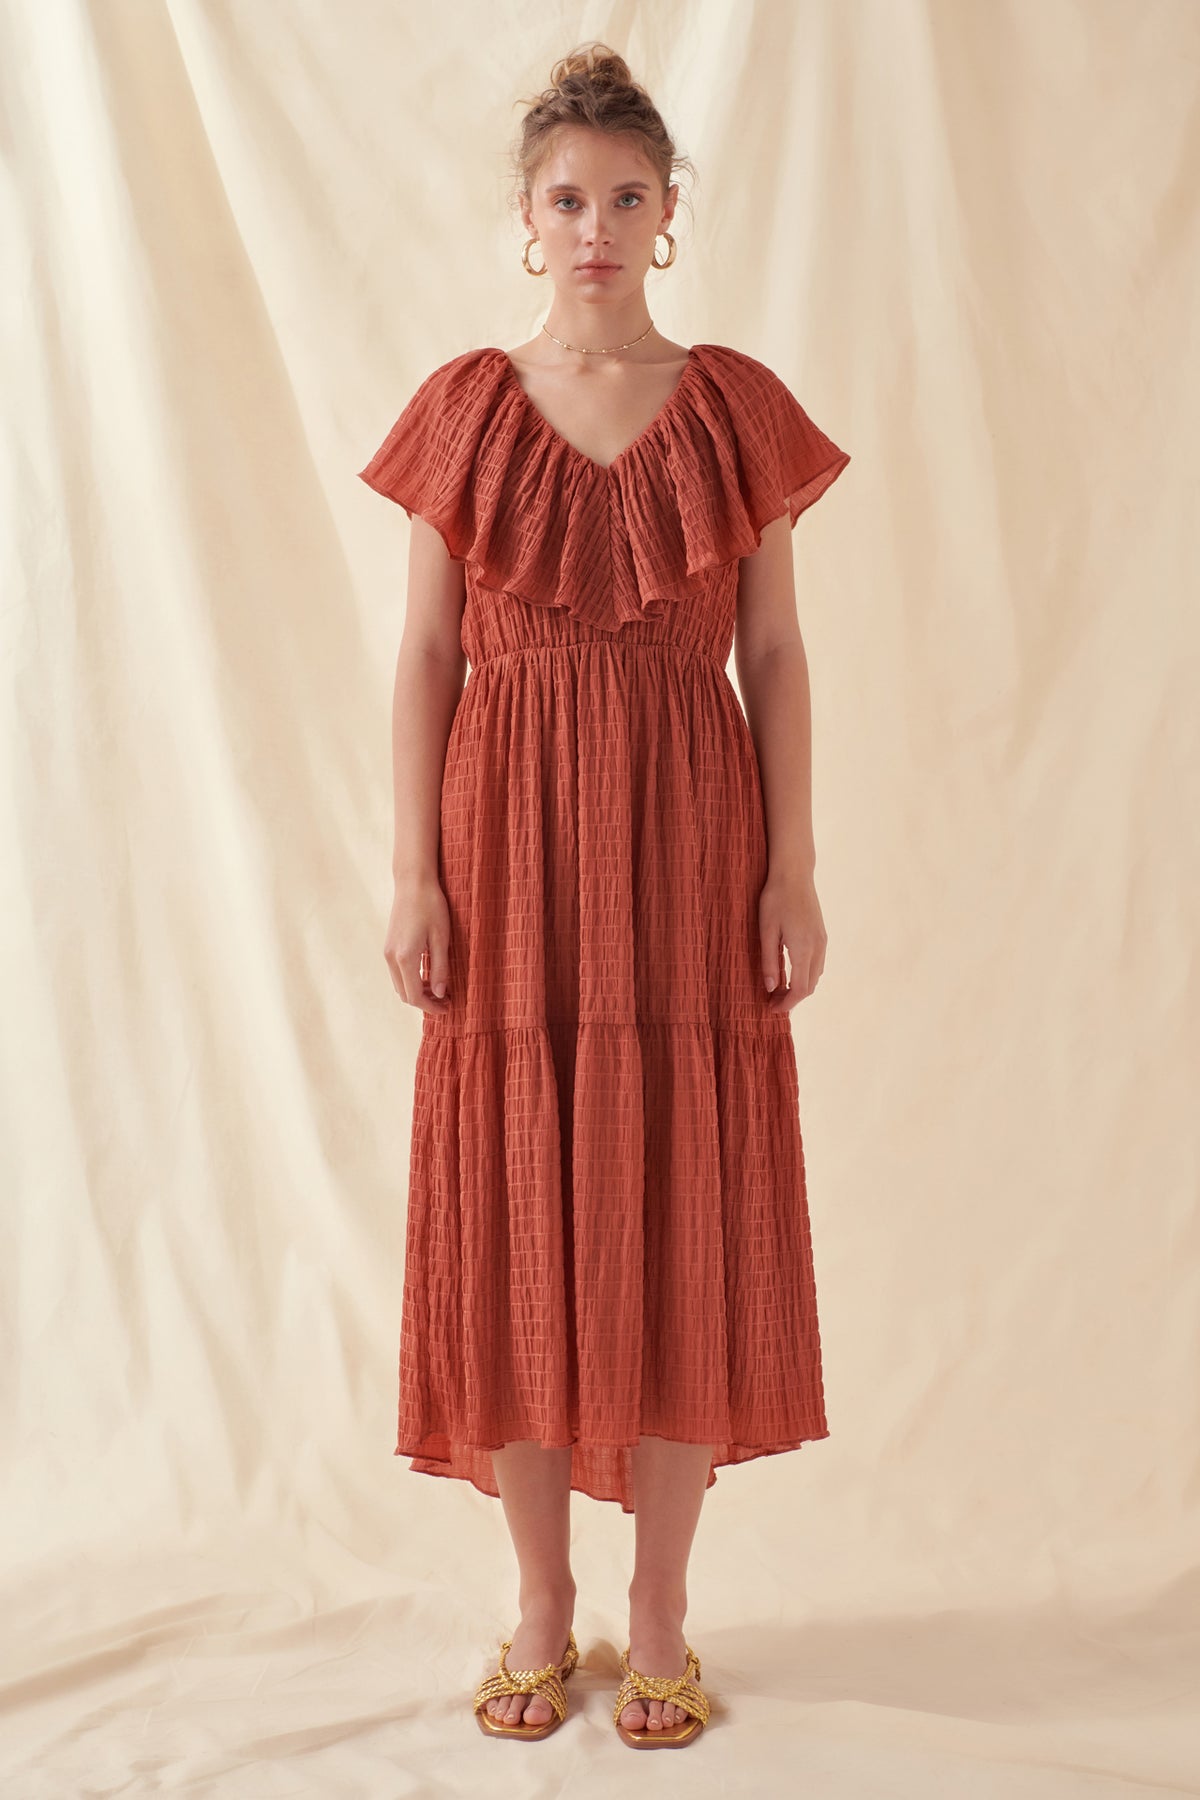 FREE THE ROSES - Midi Dress with Ruffle Detail - DRESSES available at Objectrare